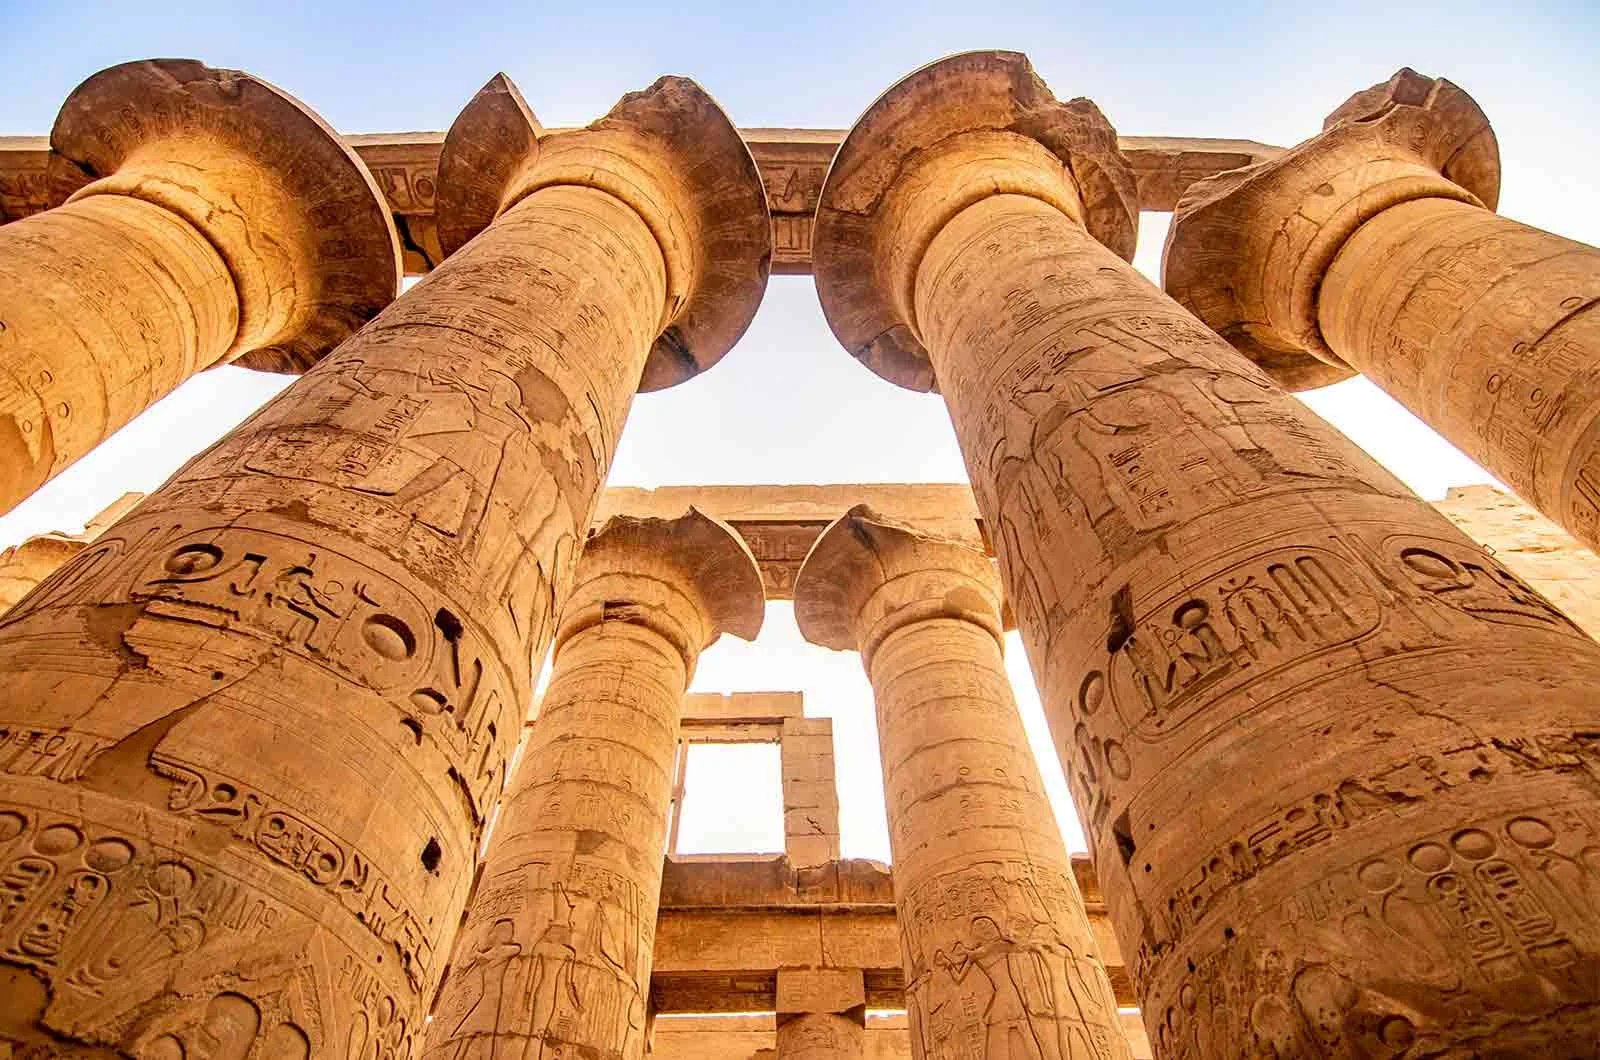 Colossal columns from the Pharaonic period engraved with hieroglyphs in Luxor, Egypt. Concept of Arabic translations.